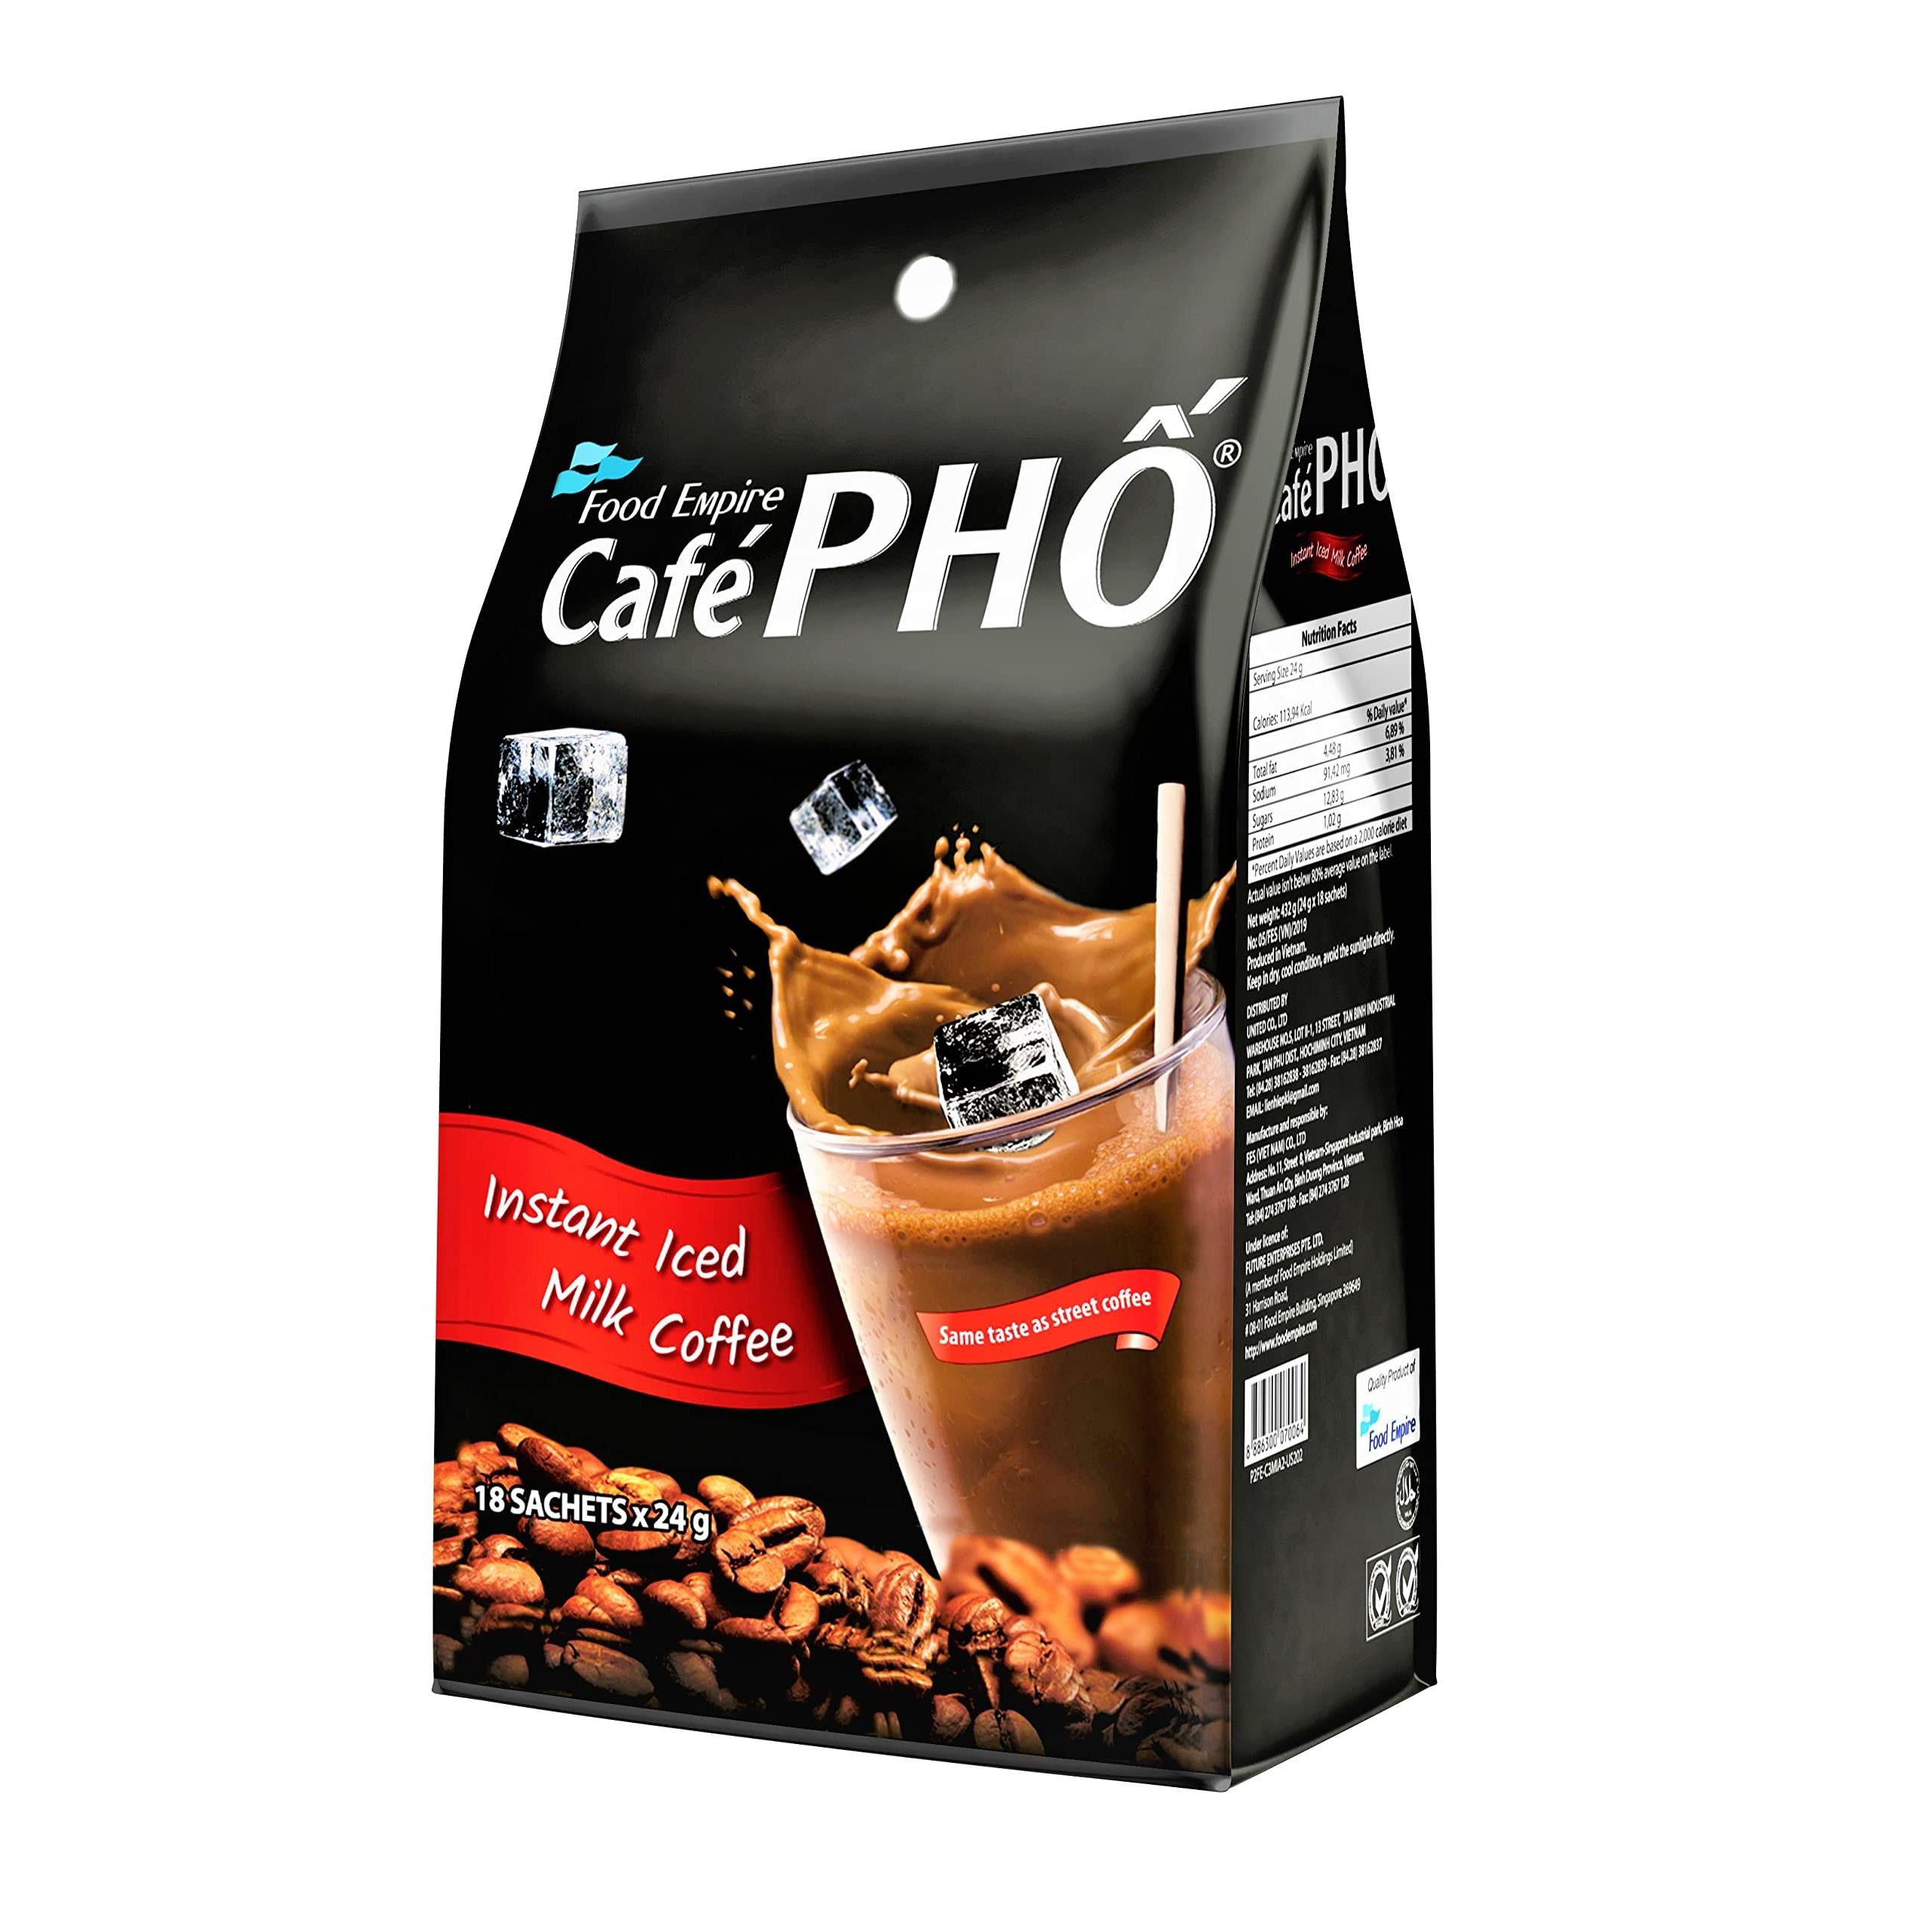 Cafe Pho Vietnamese 3in1 Instant Coffee Mix, Iced Milk Coffee, Cafe Sua Da, Single Serve Coffee Packets, Bag of 18 Sachets, Pack of 1